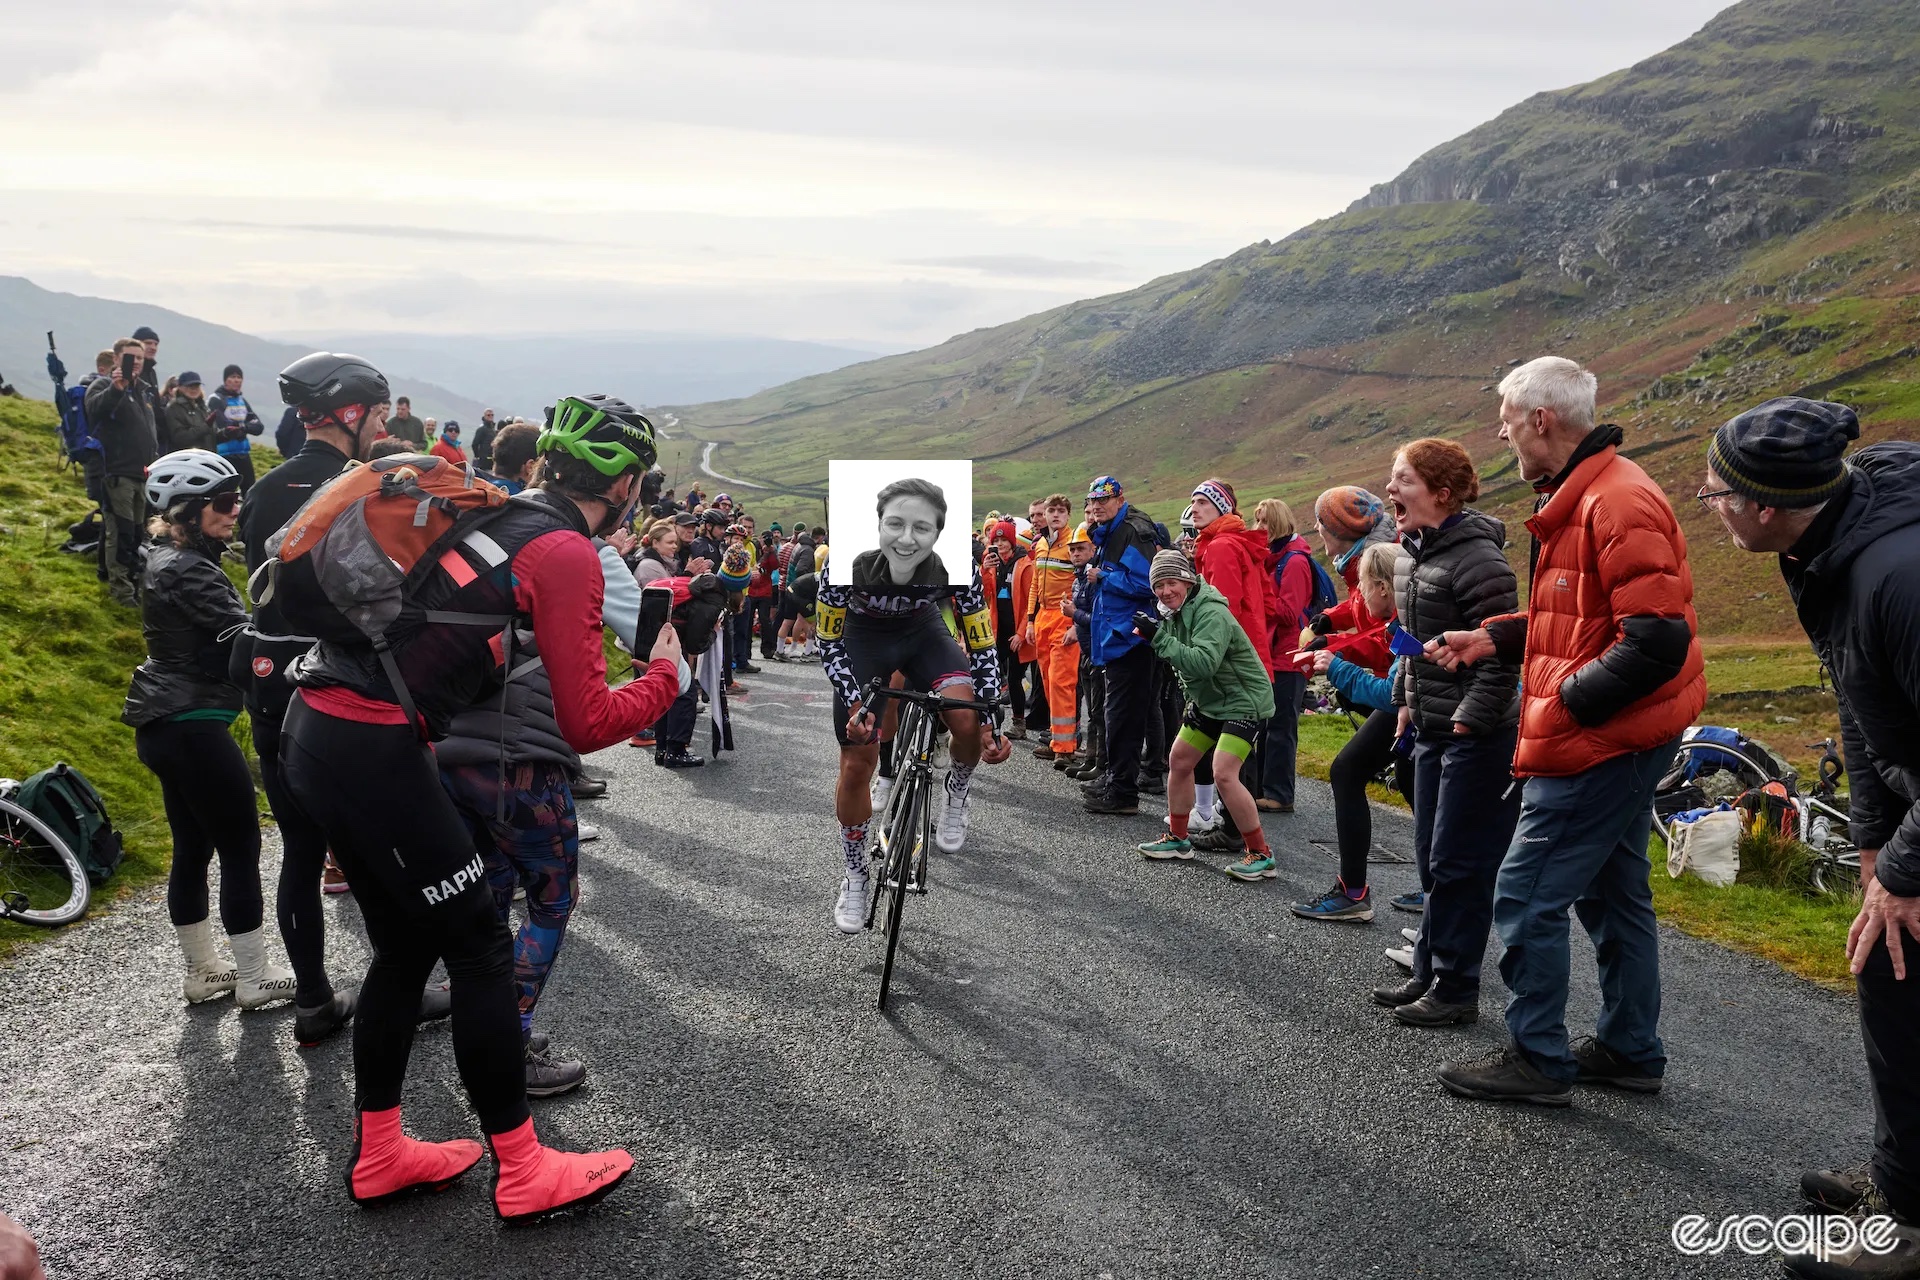 A rider in the UK Hill Climb championships rides up The Struggle. Kit Nicholson's smiling mug is implausibly, crappily Photoshopped over the rider's.